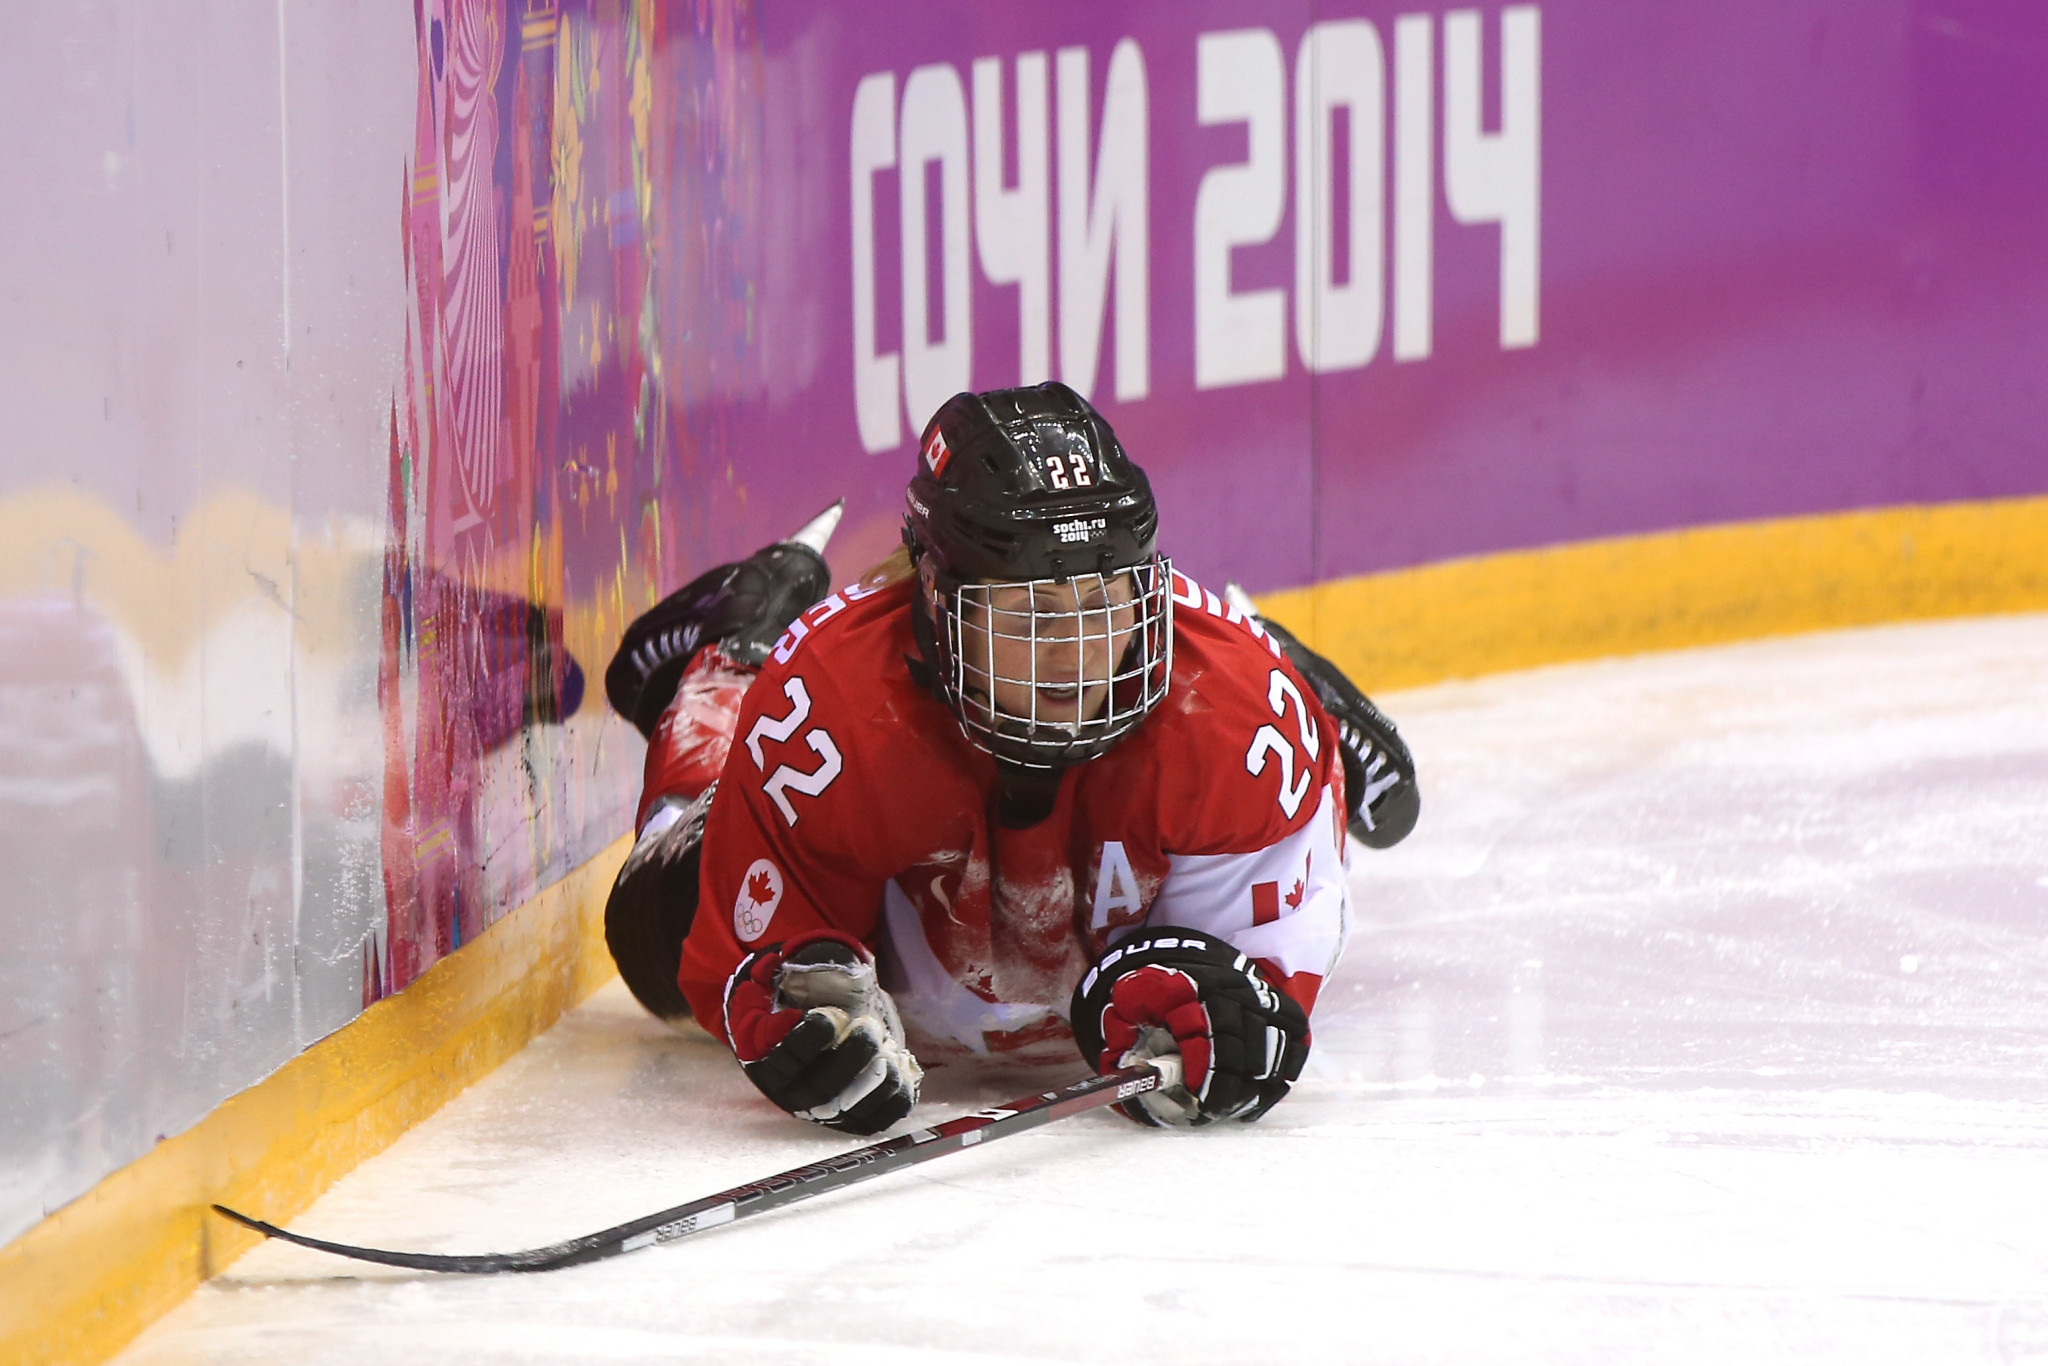 Hayley Wickenheiser has raised concerns about gender equality after the Pan-Korea decision ©Getty Images